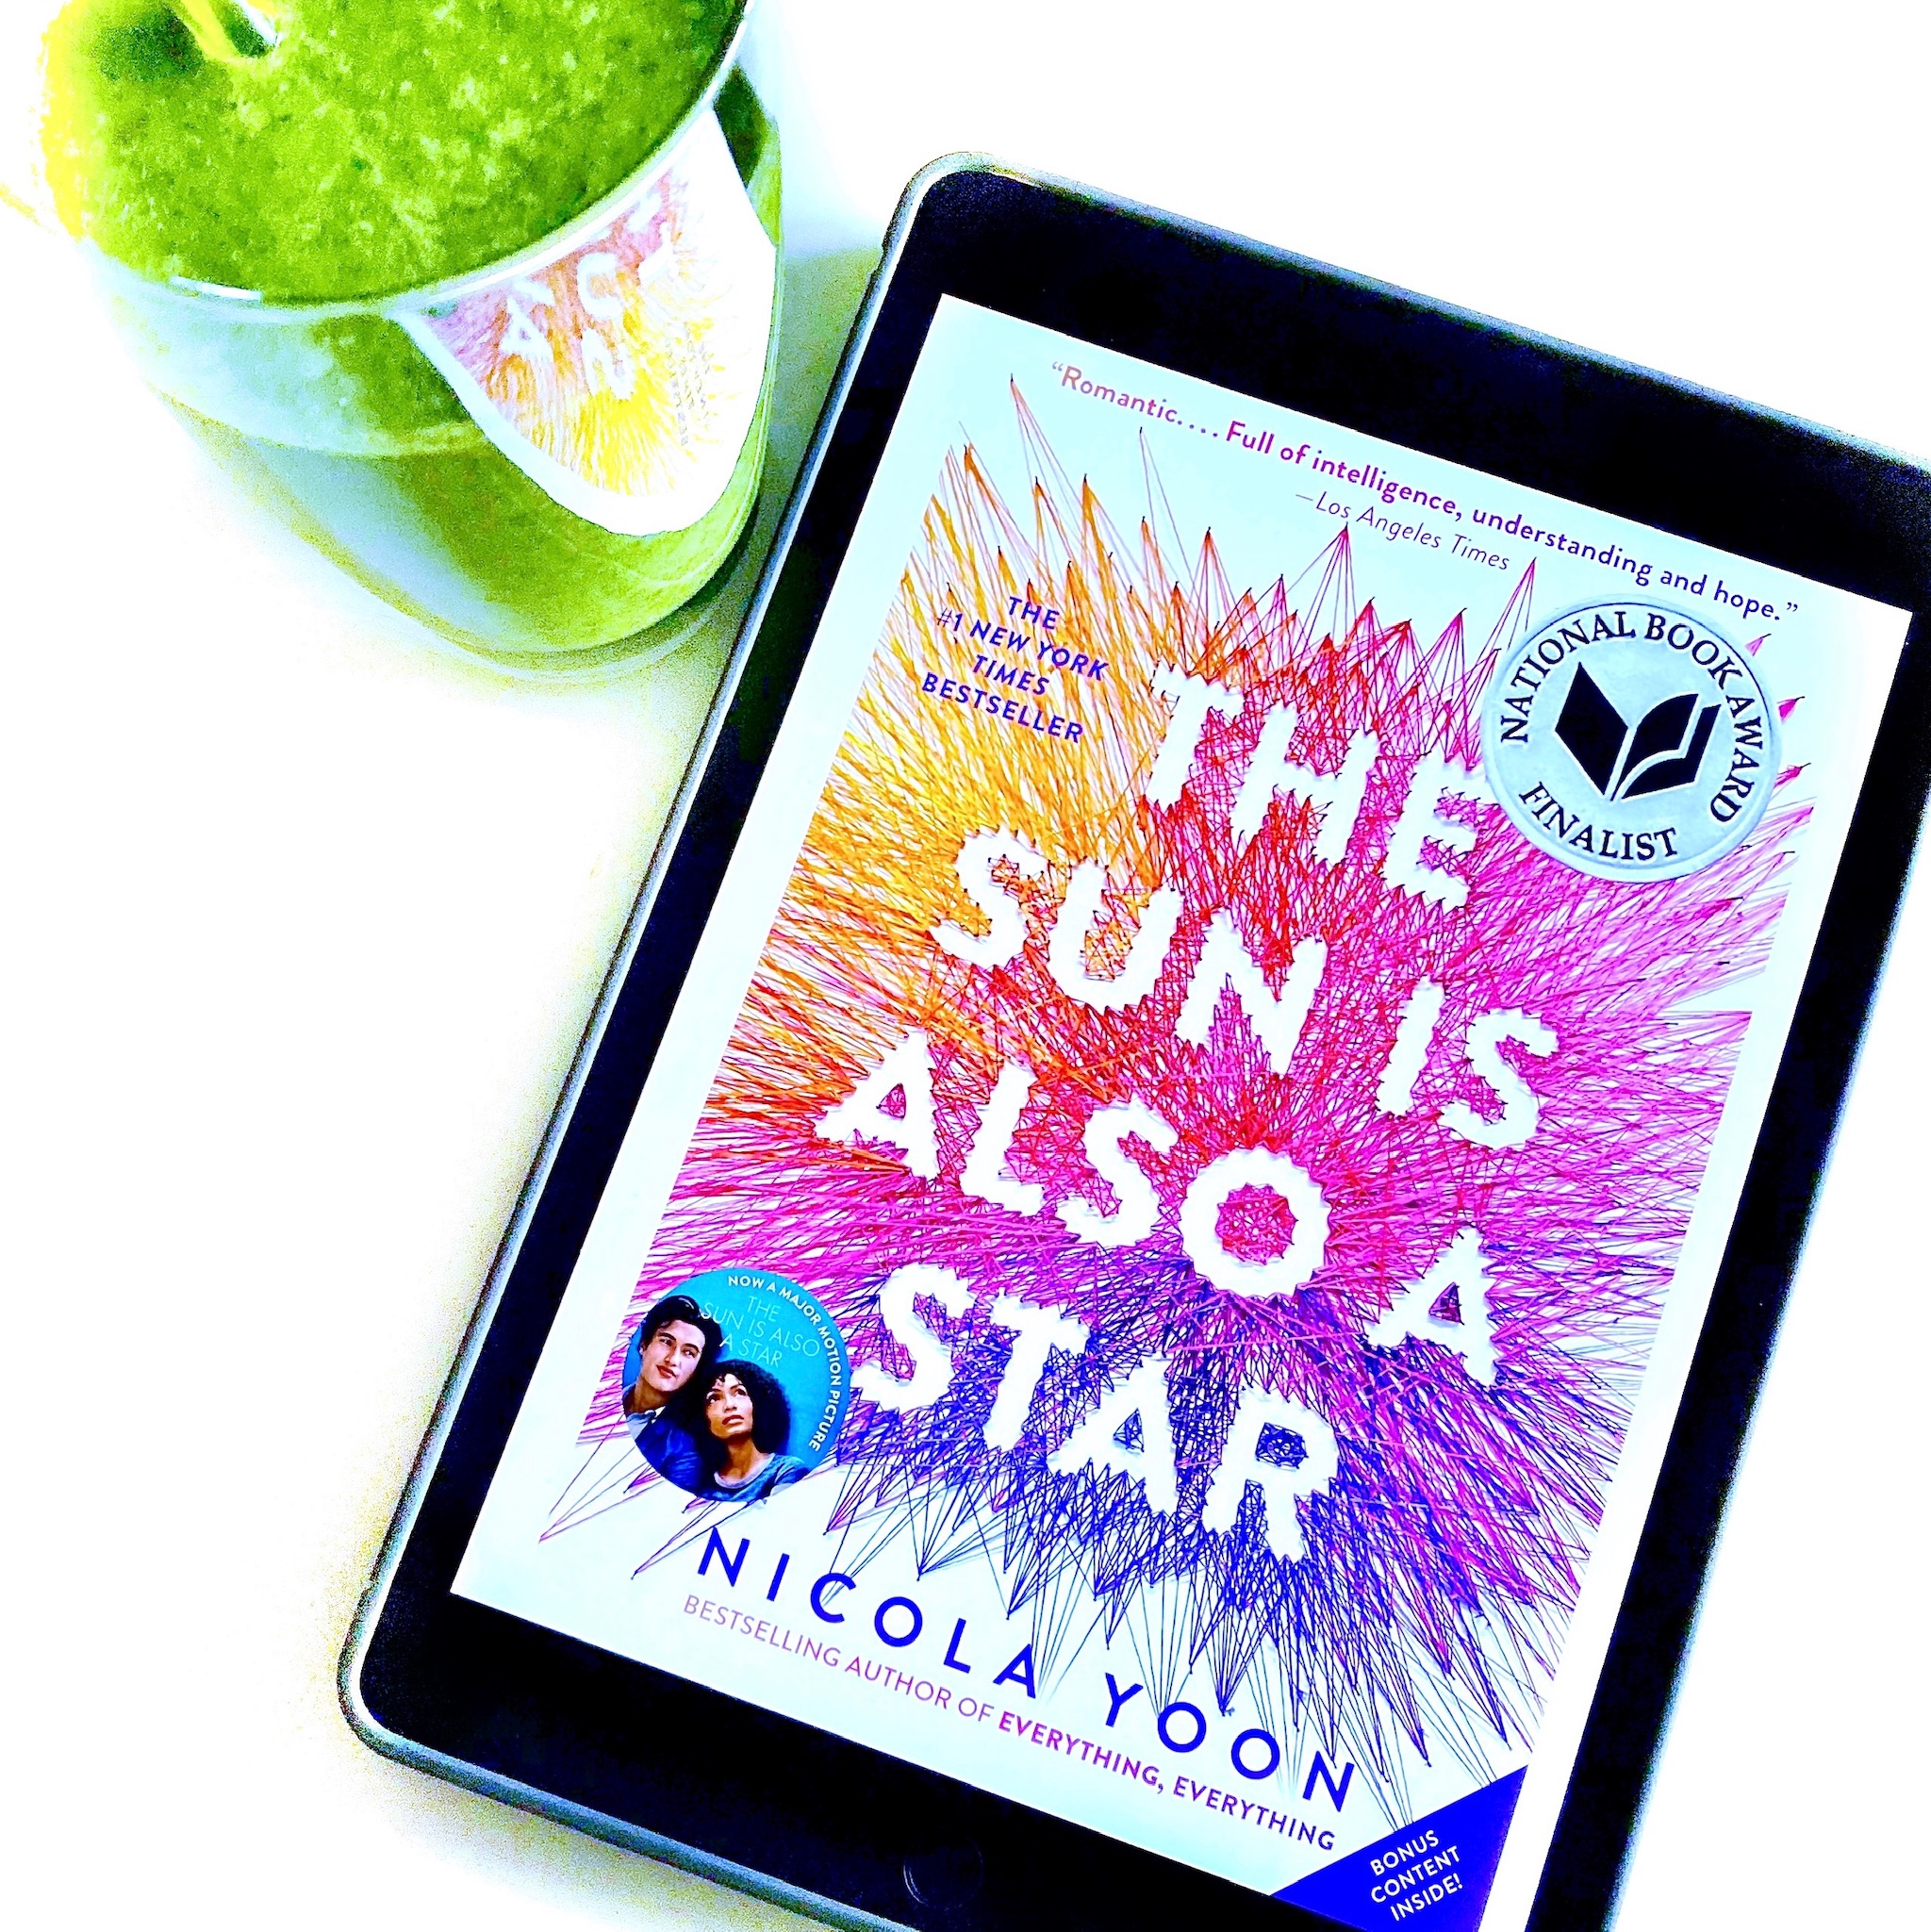 the sun is also a star book review